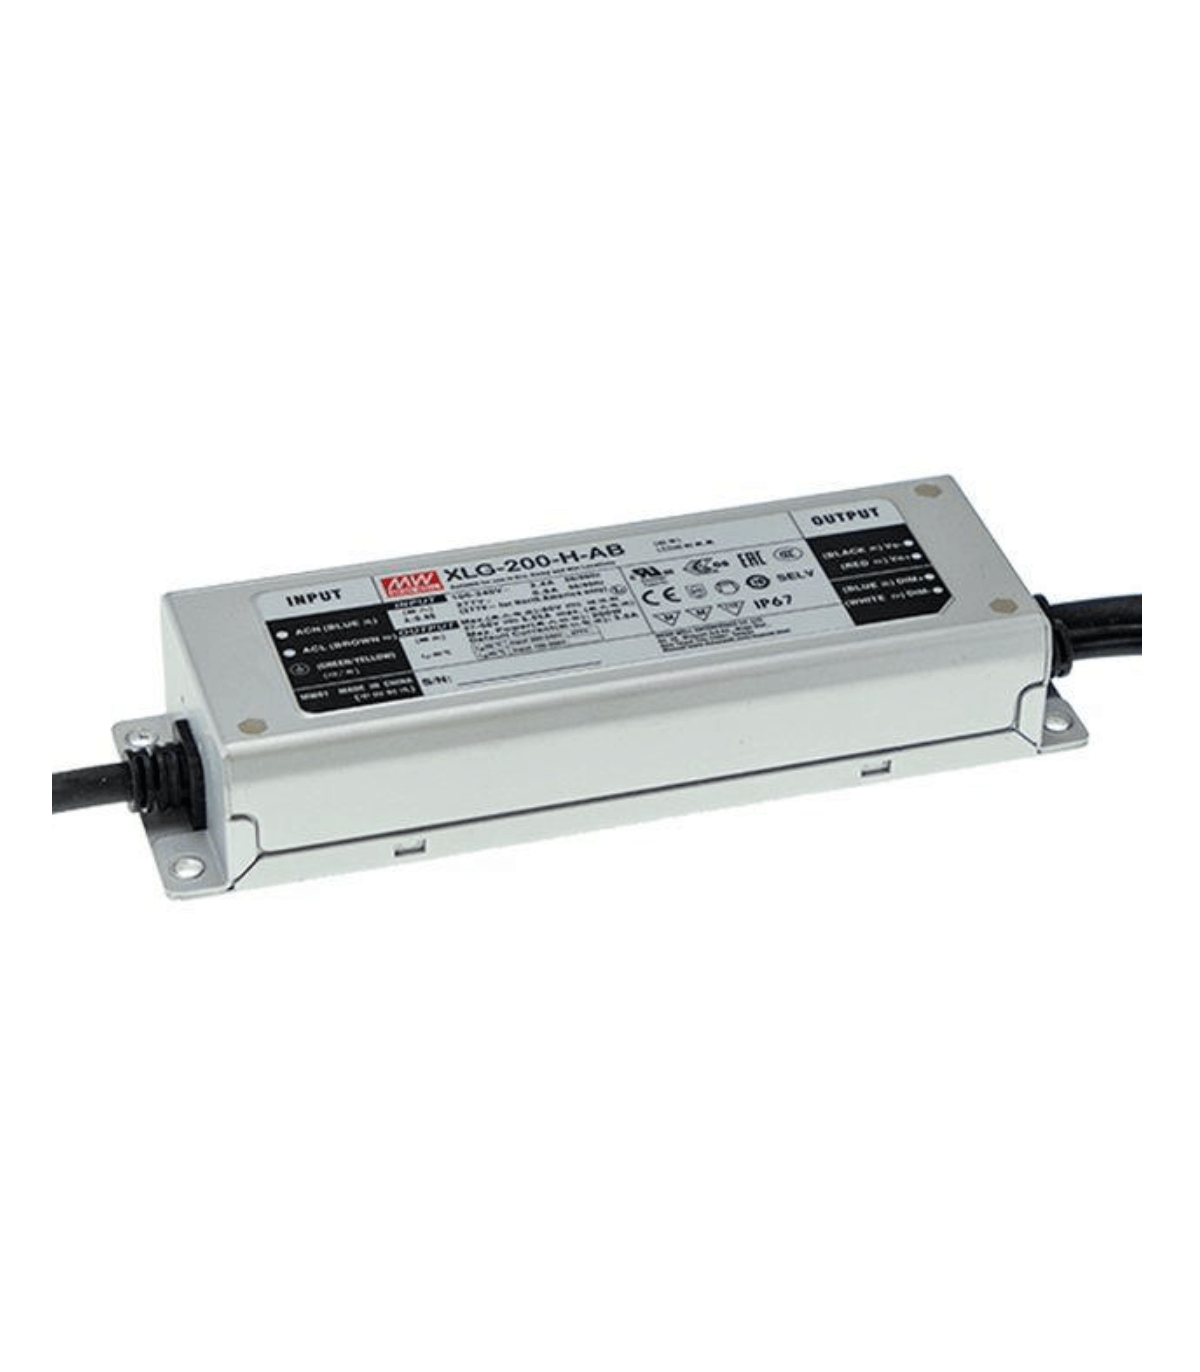 Transformateur Led 24V MEANWELL 150W - Eclairage led